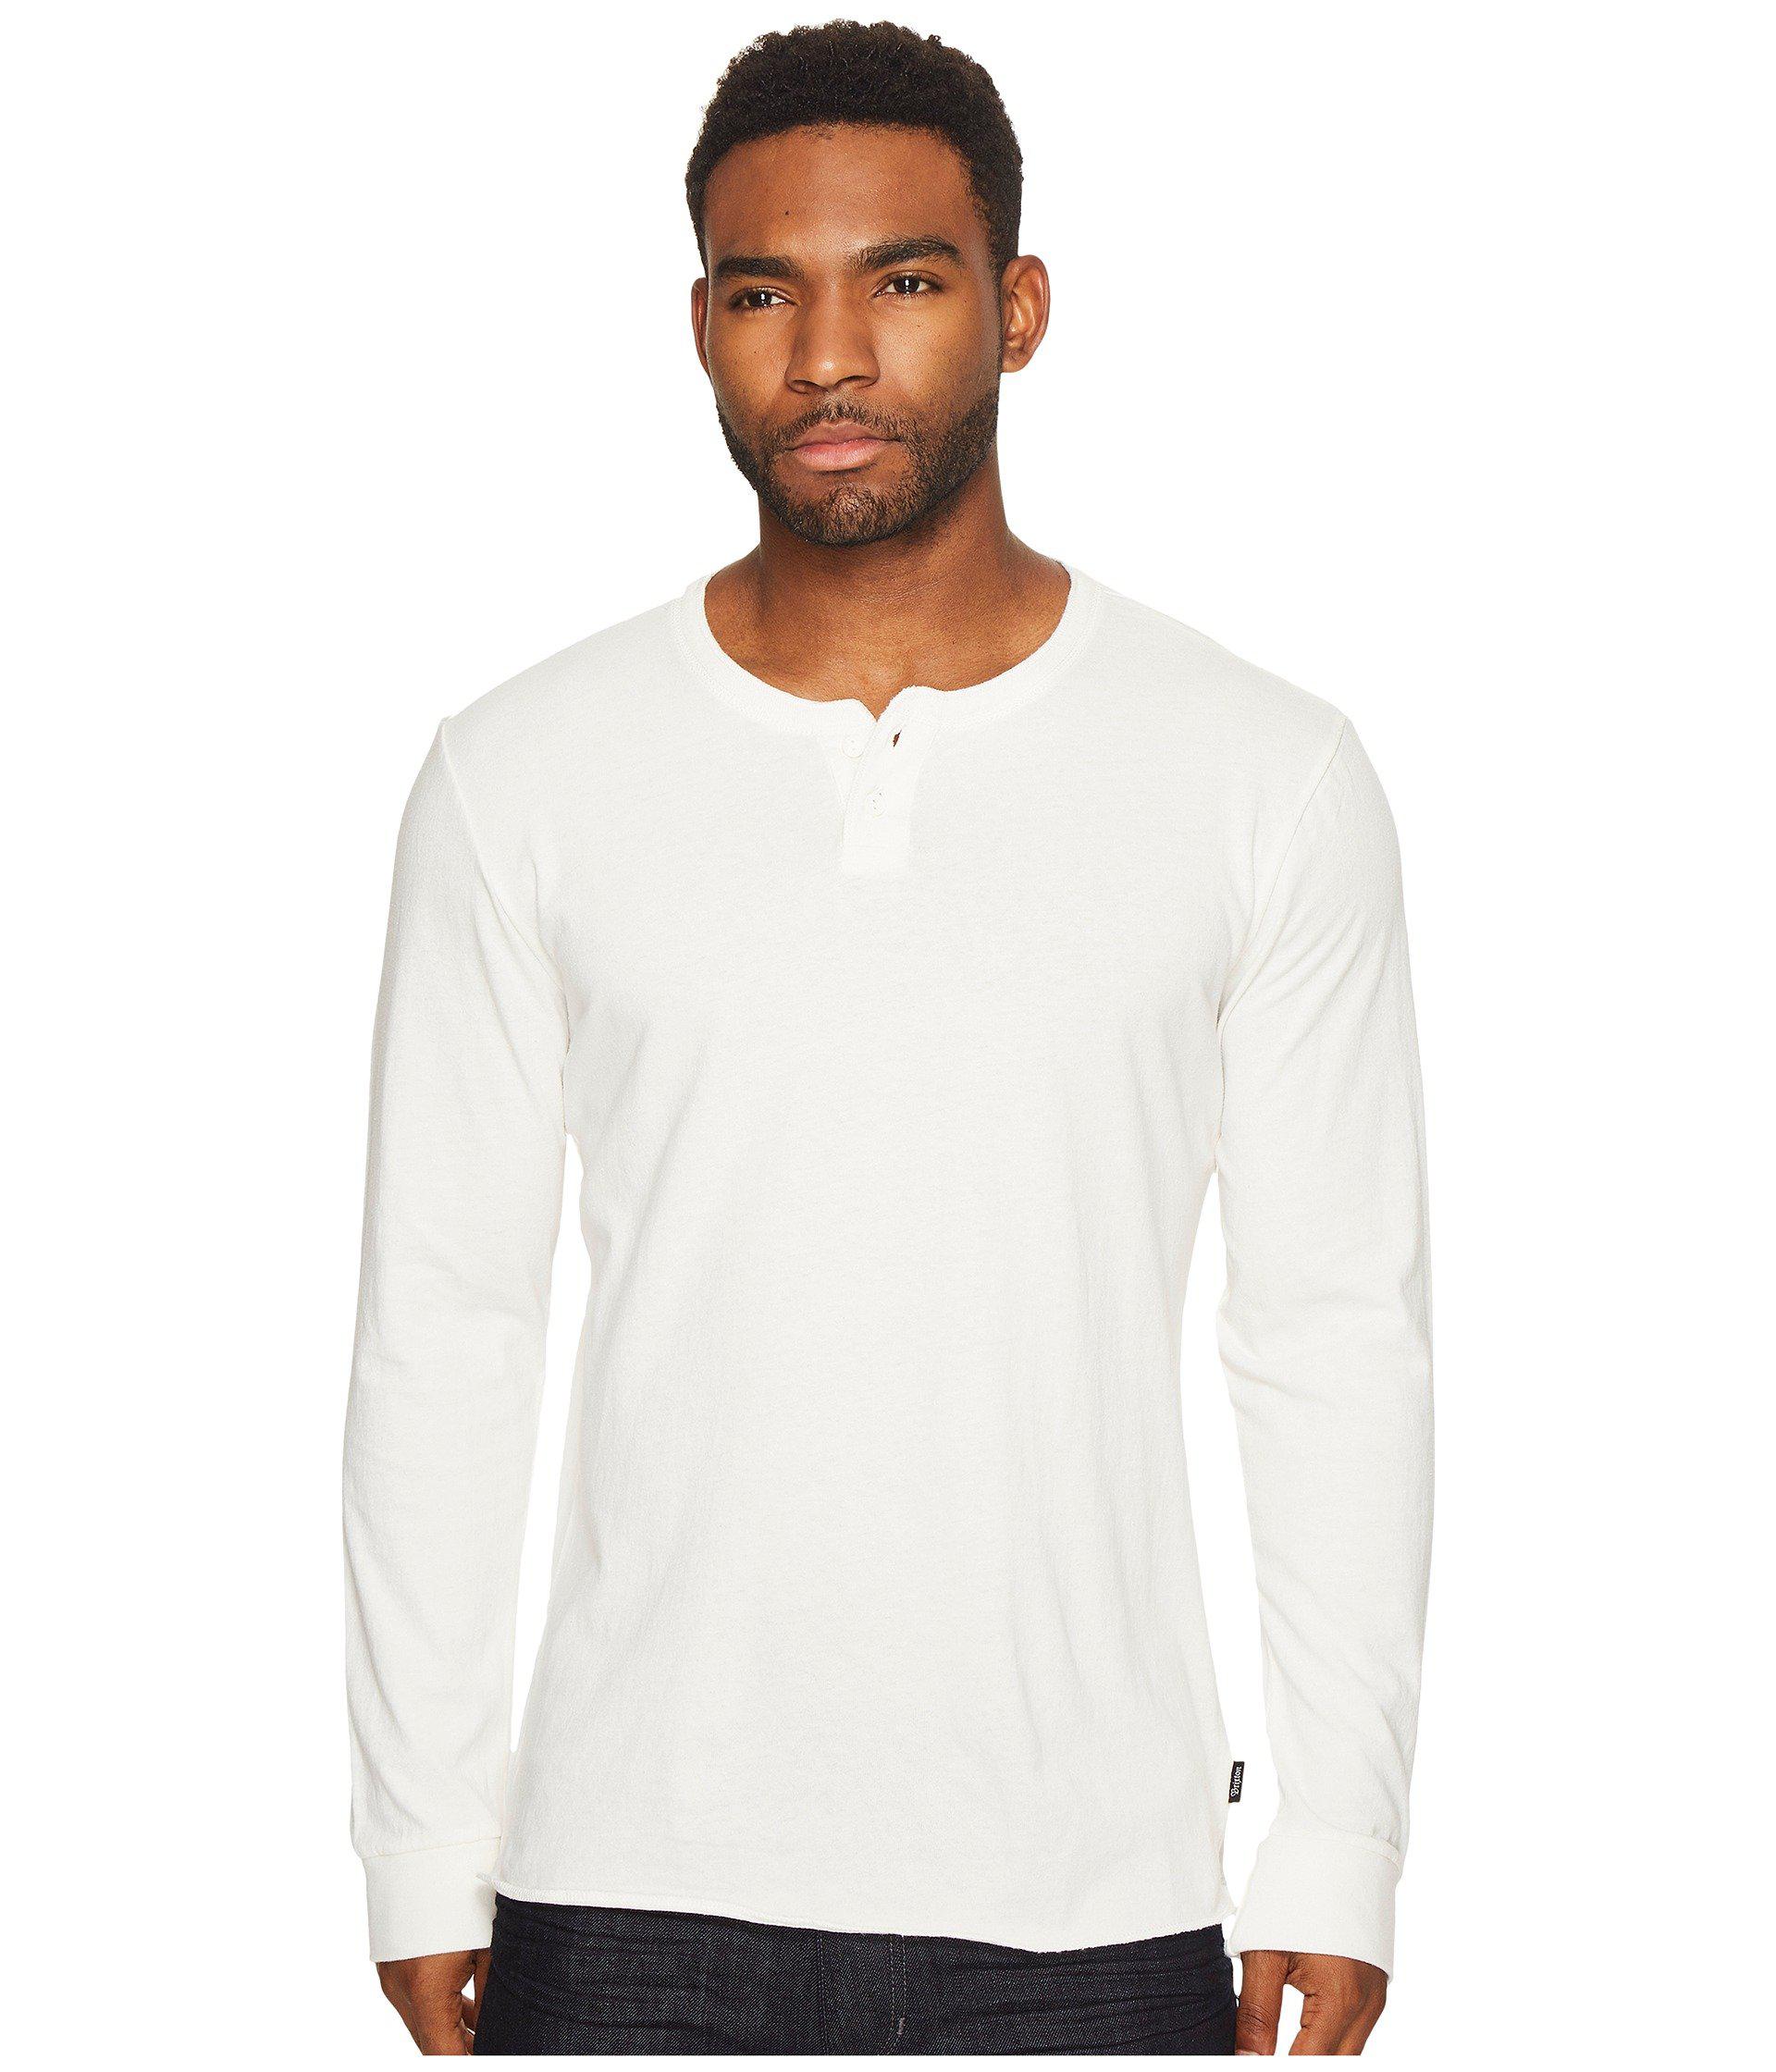 Brixton Cotton Redford Ii Long Sleeve Henley in White for Men - Lyst